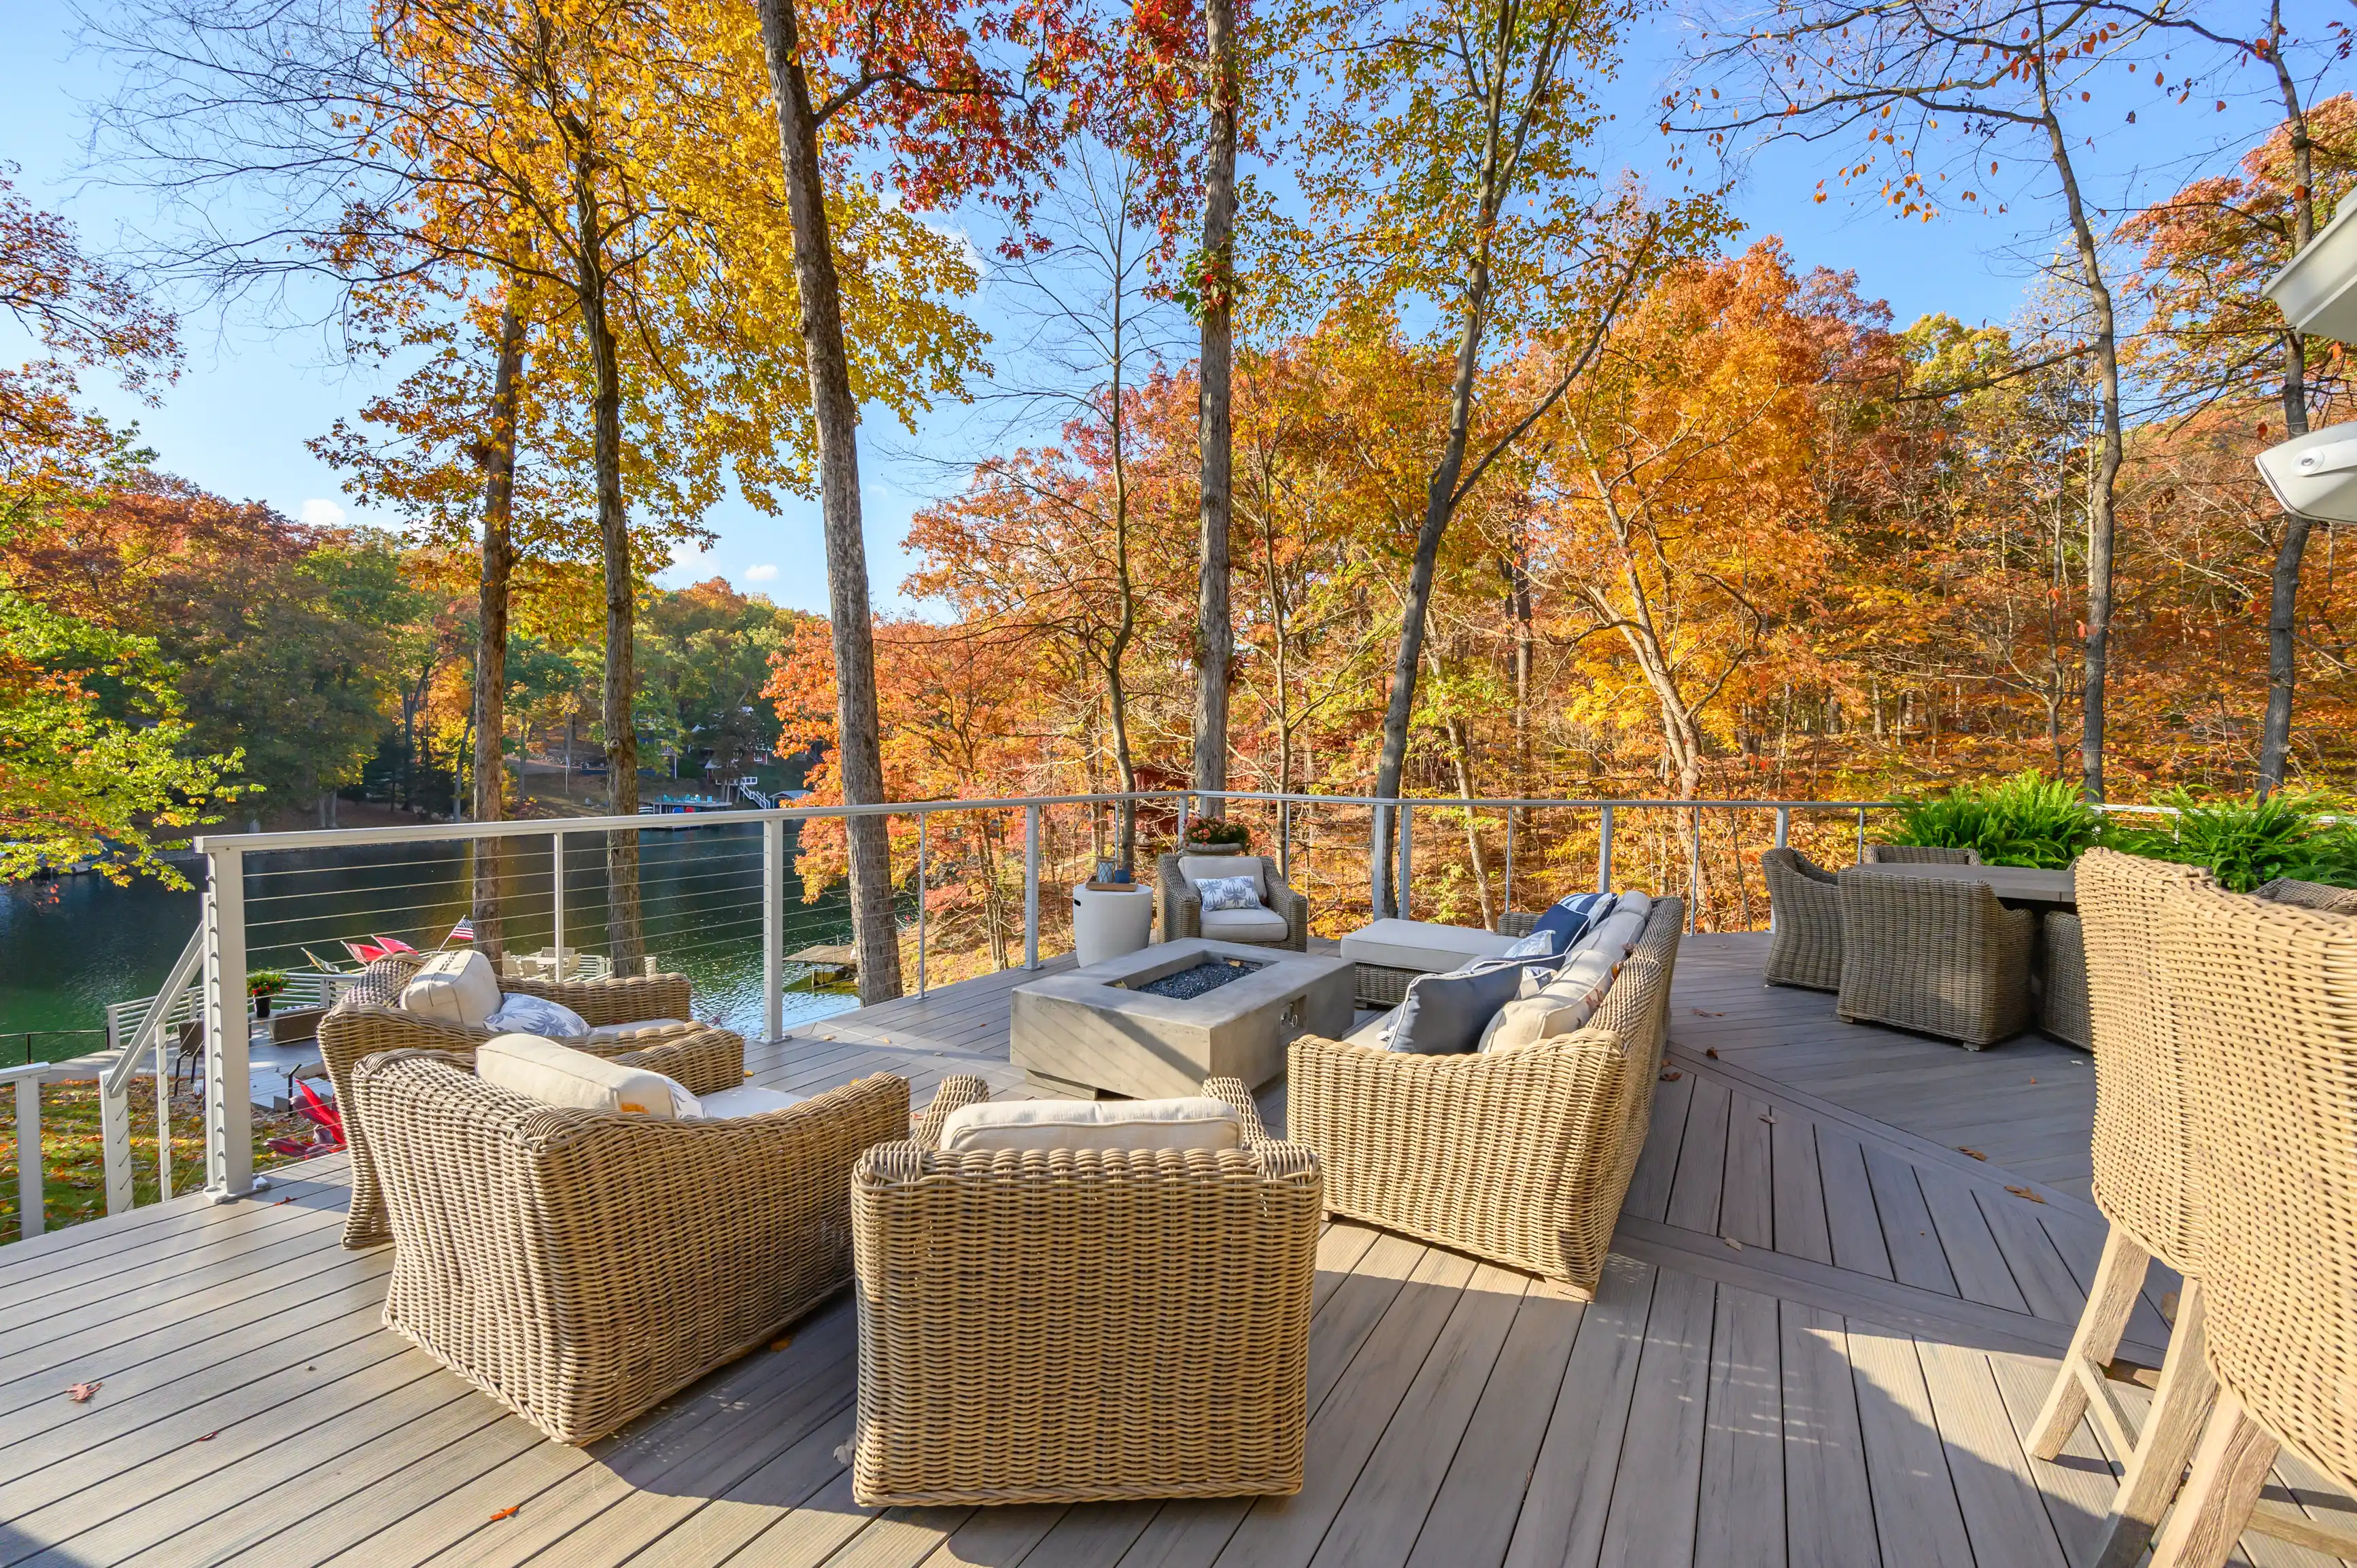 Alt text: "Spacious outdoor deck with wicker furniture overlooking a tranquil lake surrounded by colorful autumn trees."